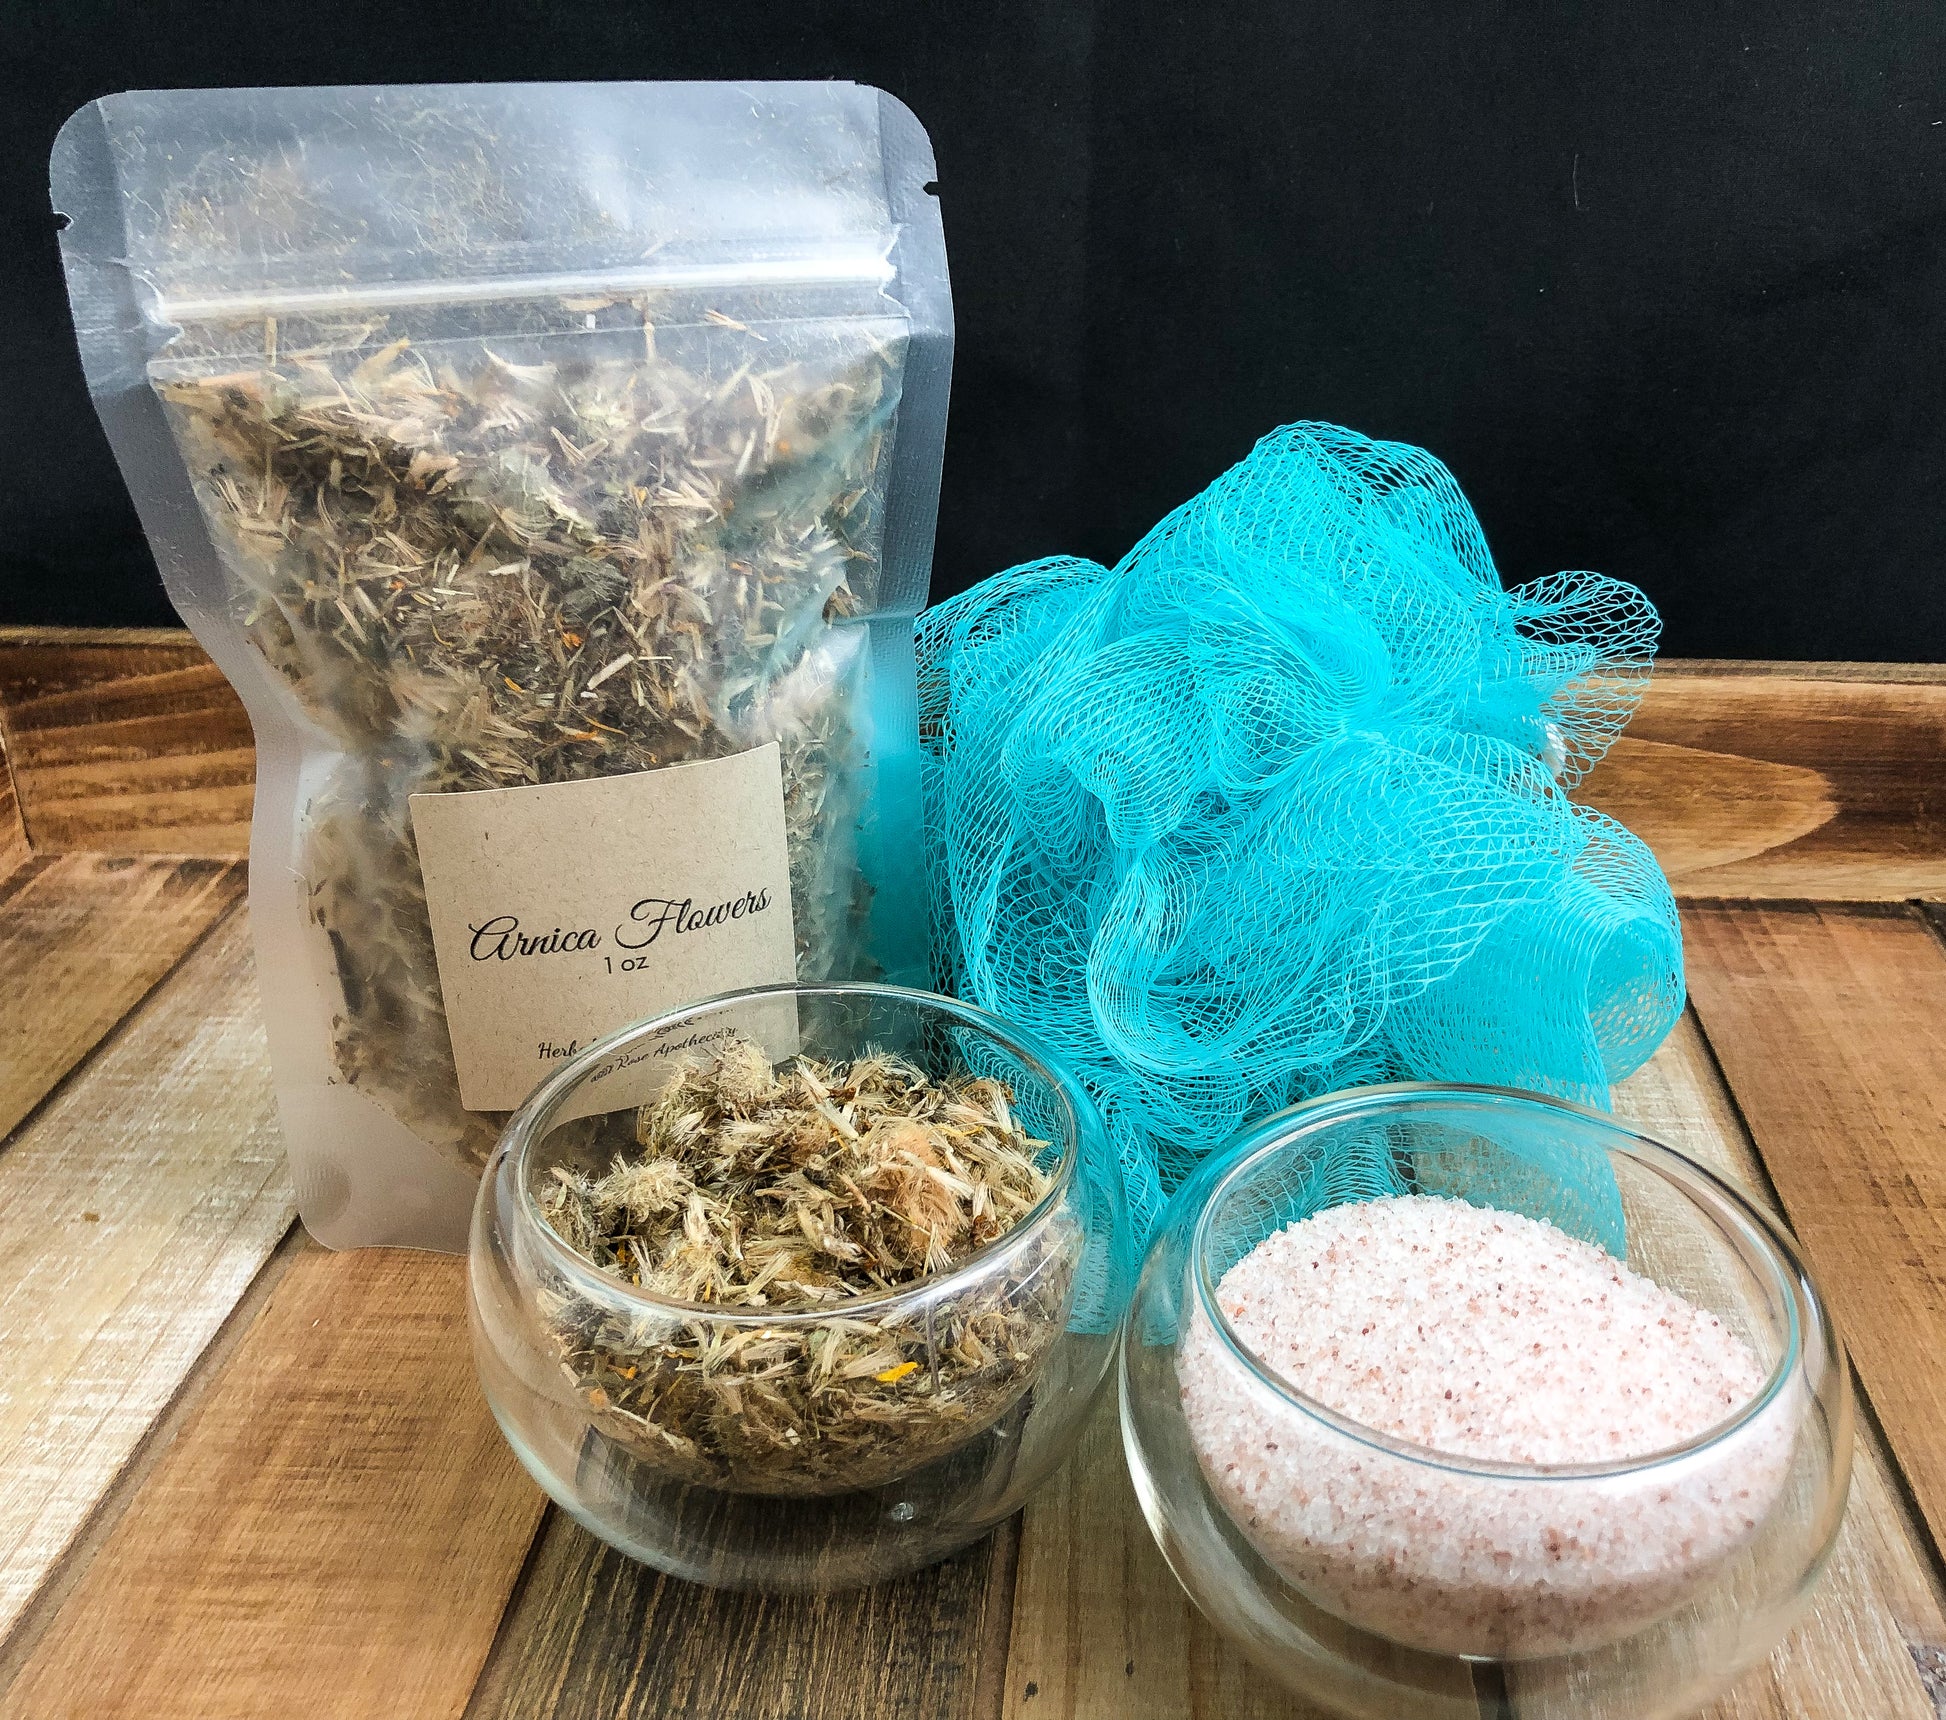 dried arnica flowers in a 1oz bag next to a bath sponge and two clear bowls of arnica flowers and pink Himalayan salt all on a wooden tray with black background